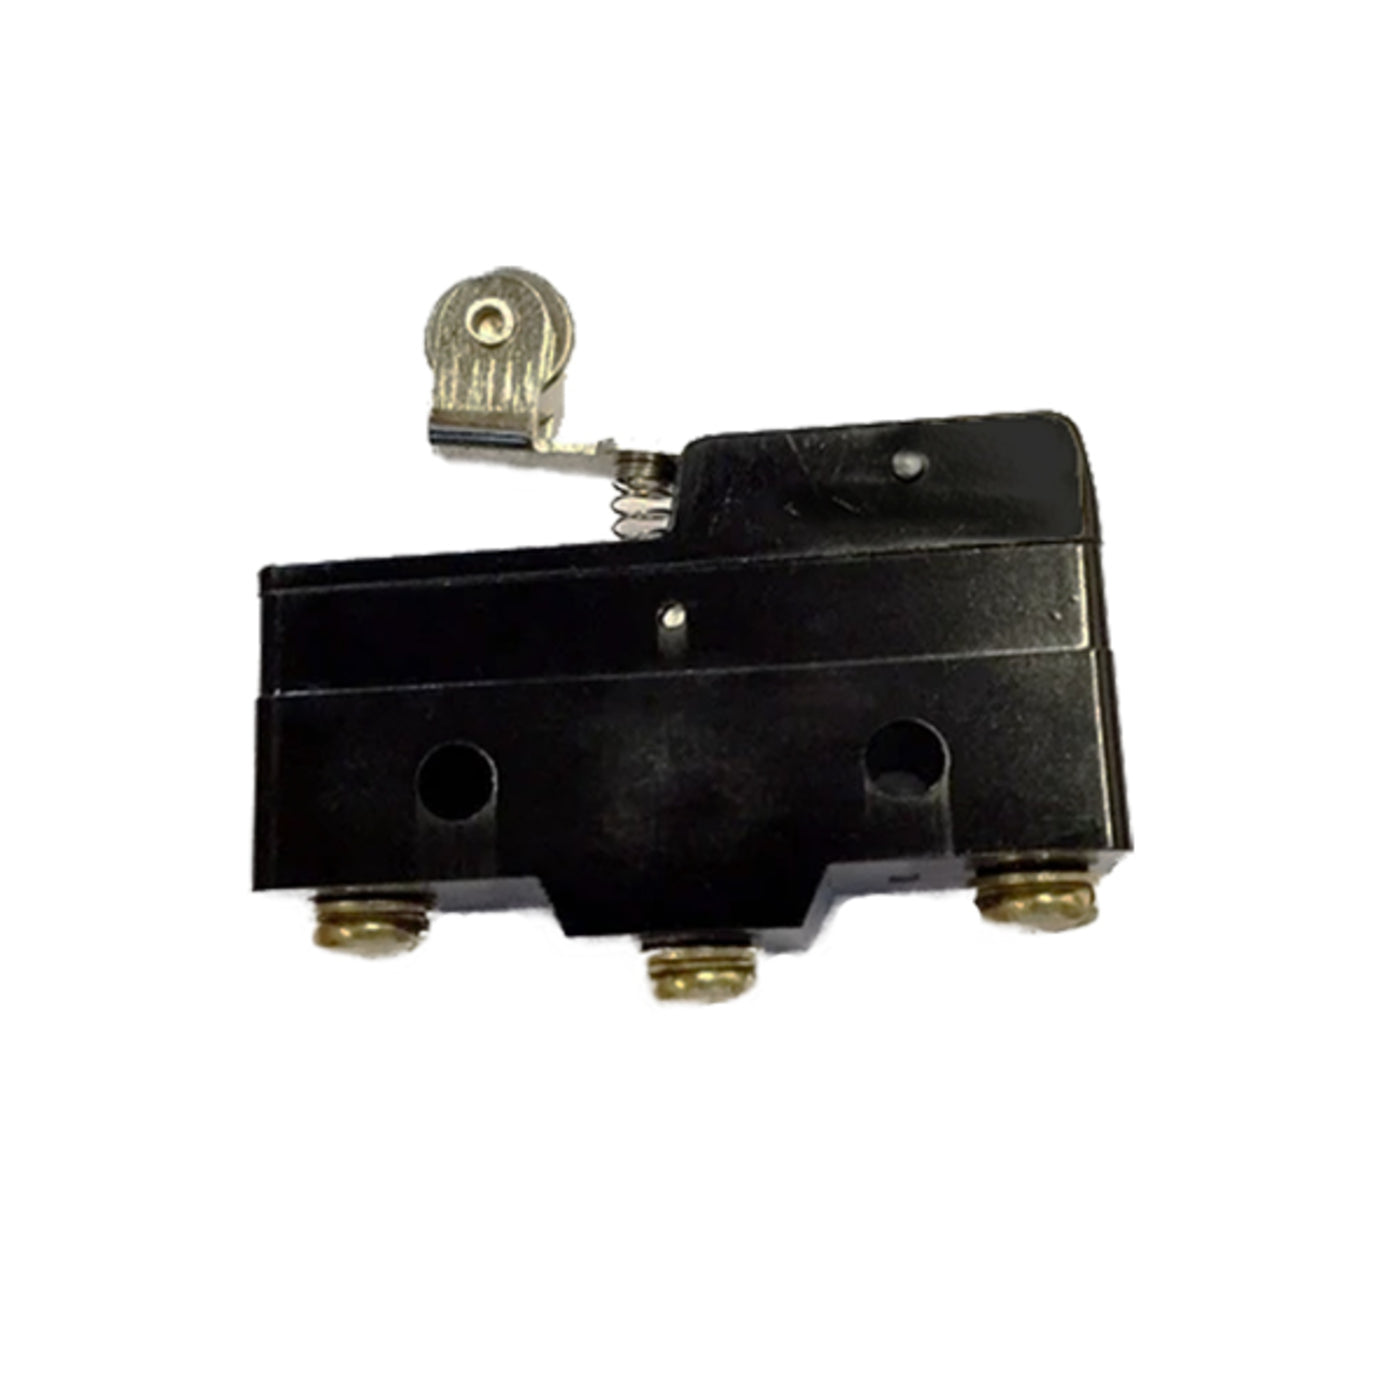 E-Z-GO Shuttle Gas 4/6 Brake Pedal Micro-switch (Years 2008-Up)